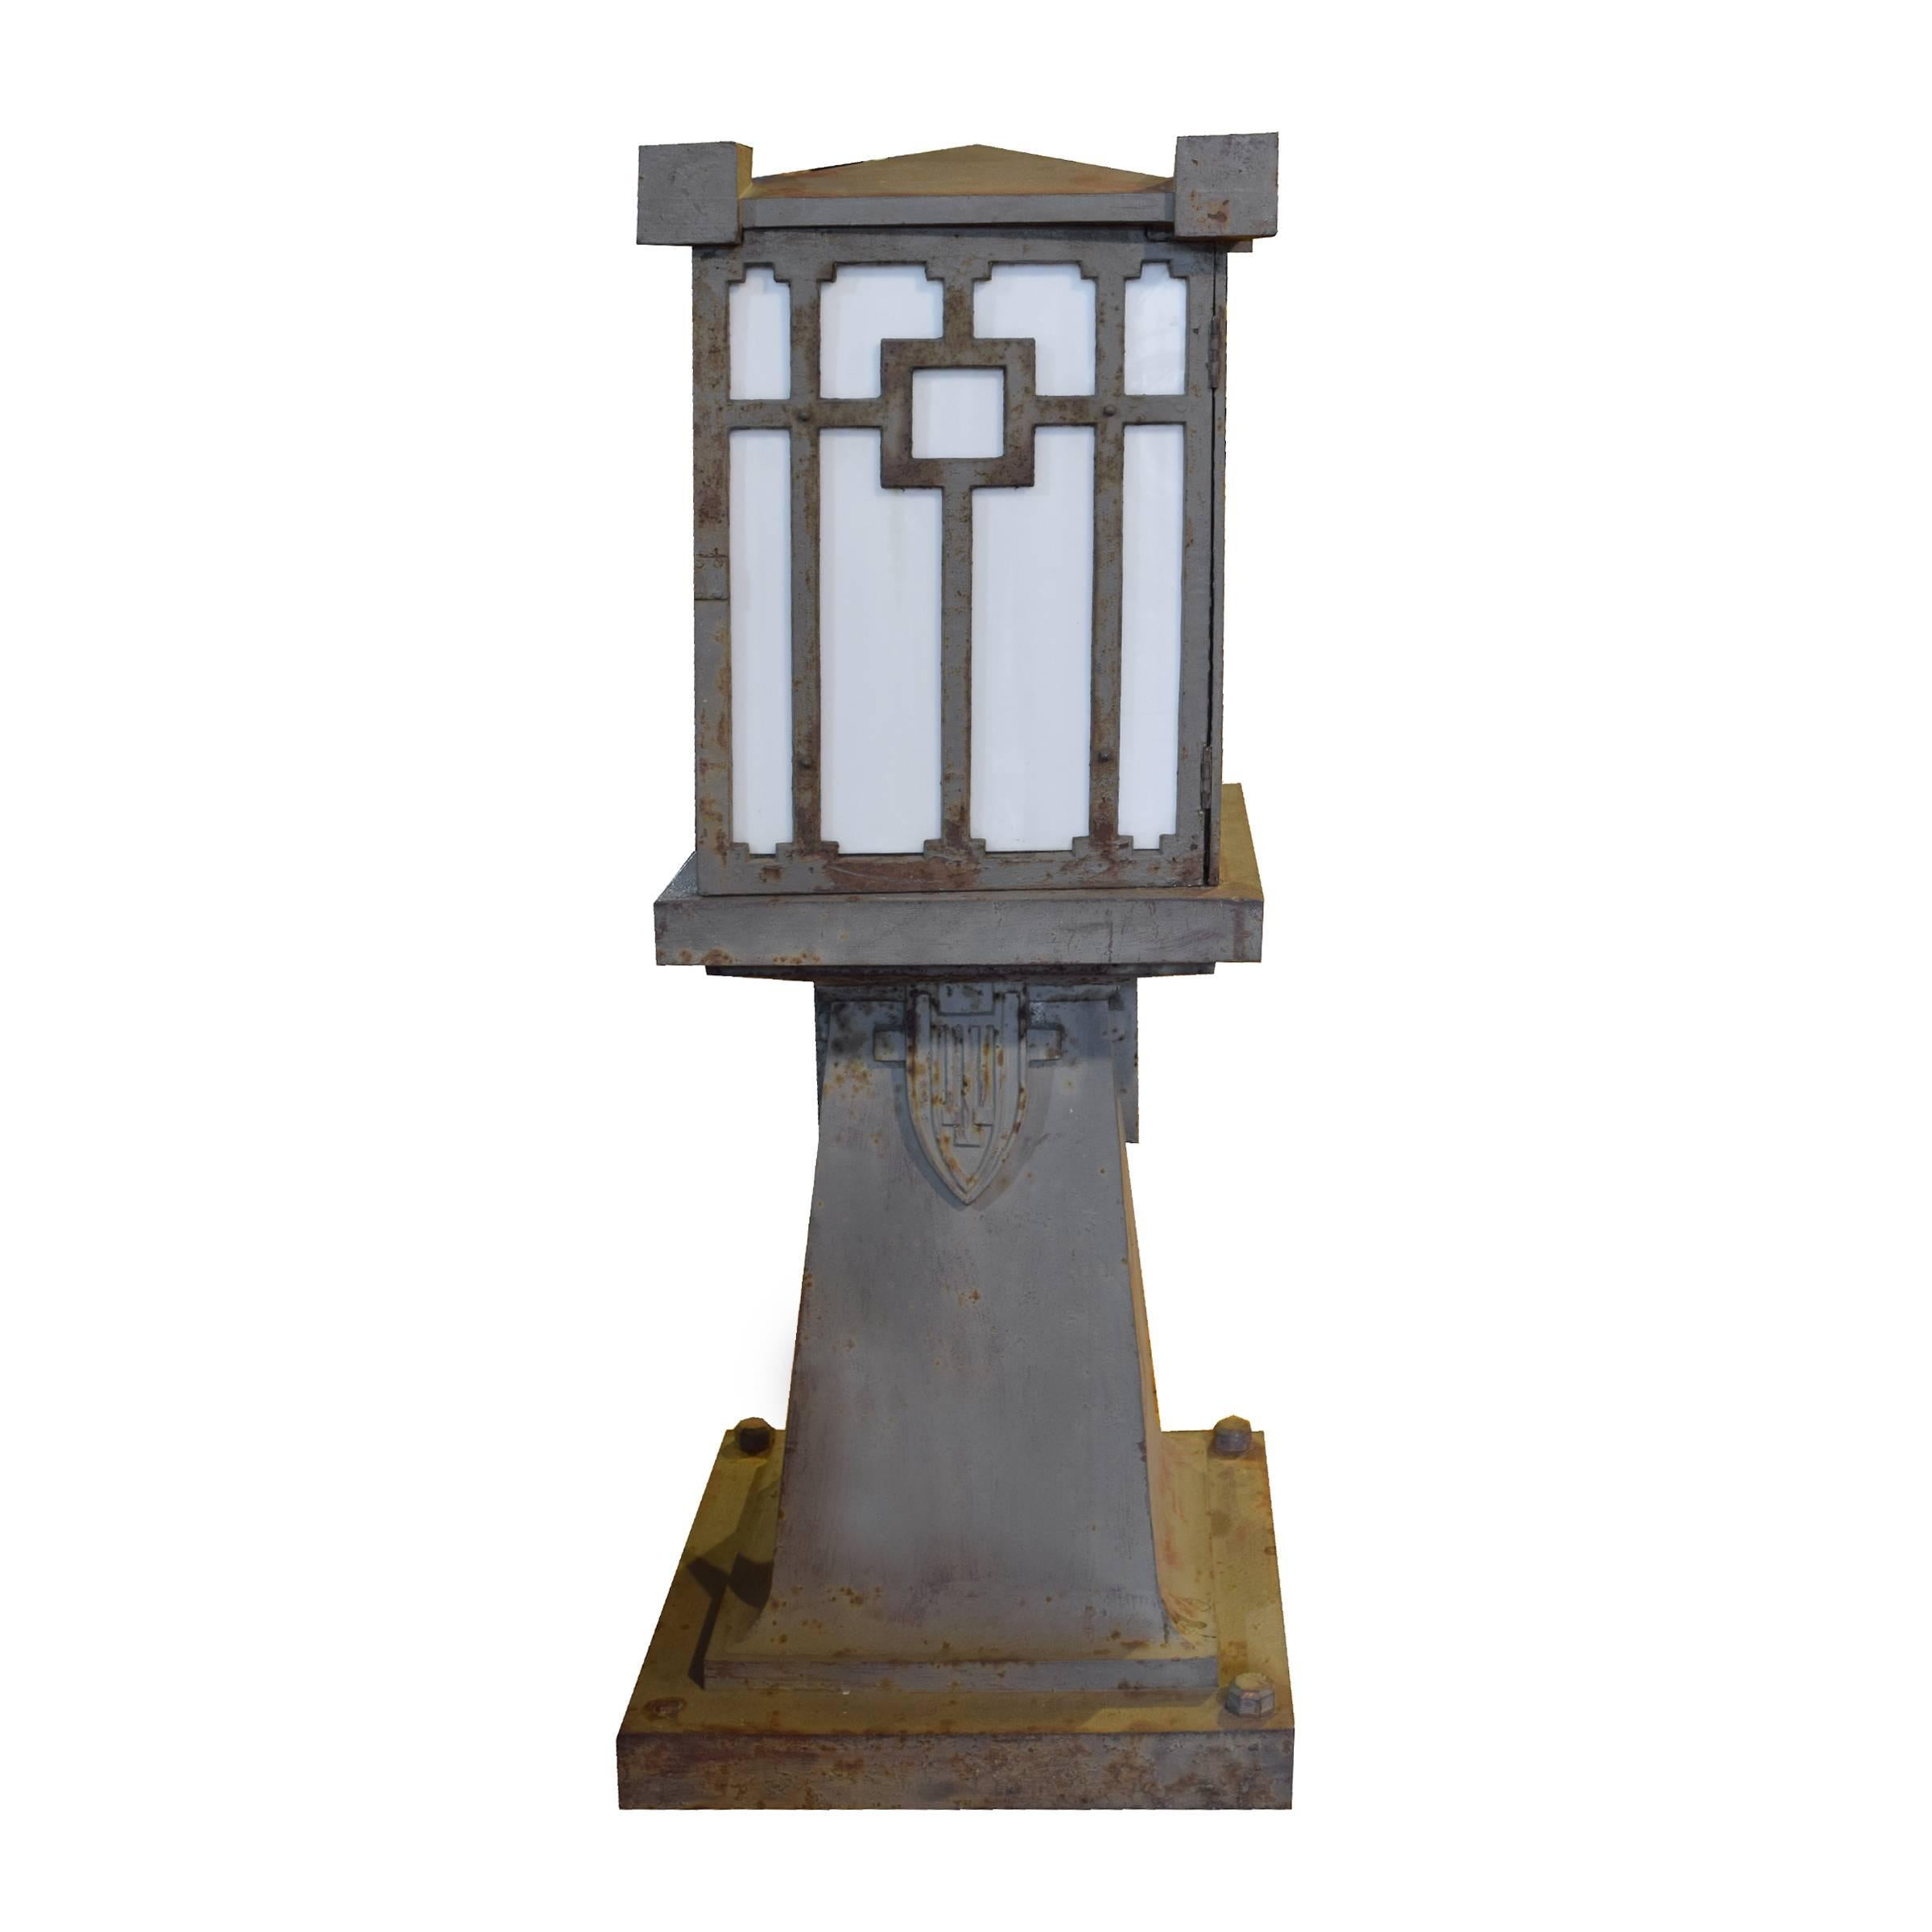 A pair of cast iron Prairie School bridge lights on fluted bases with a four sided shades with opaque glass, circa 1900.